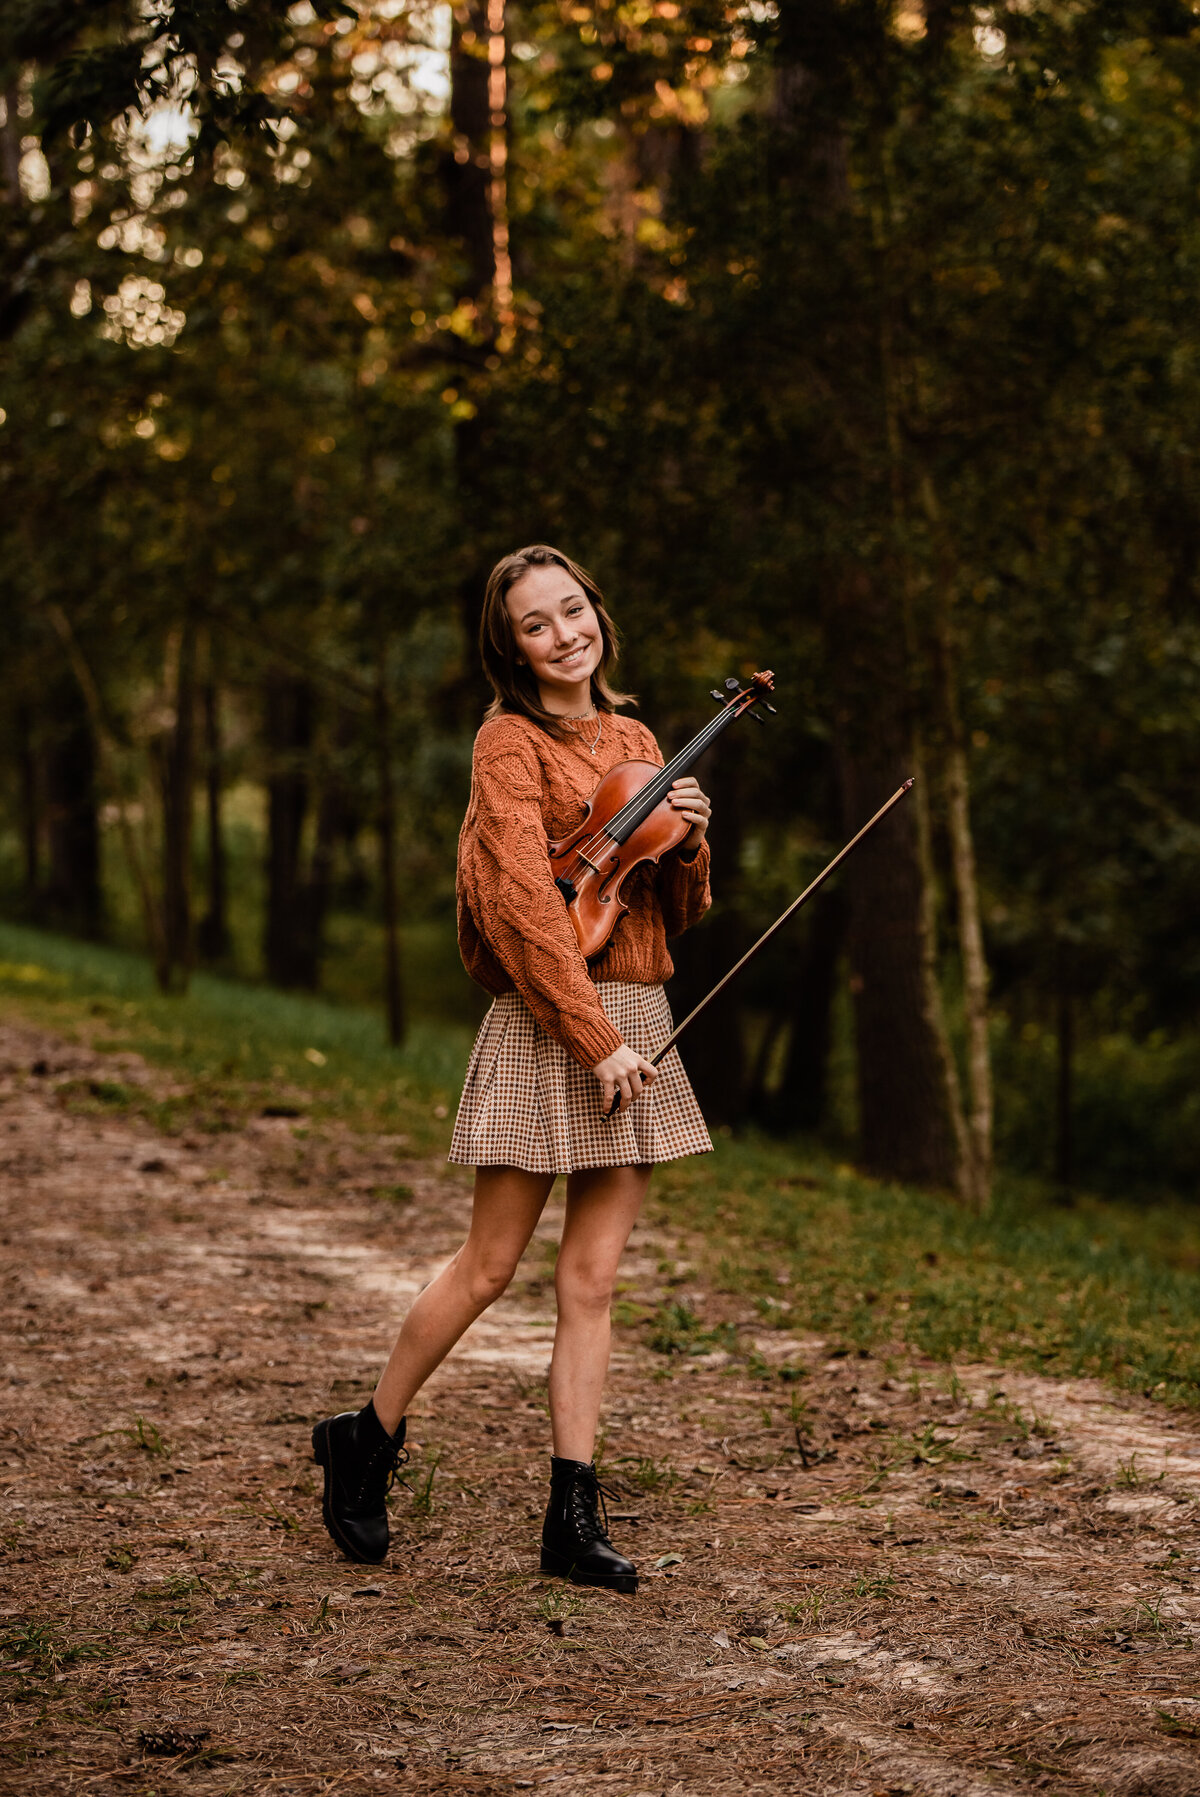 A Kingwood High School senior stands in a forest setting holding her violin.